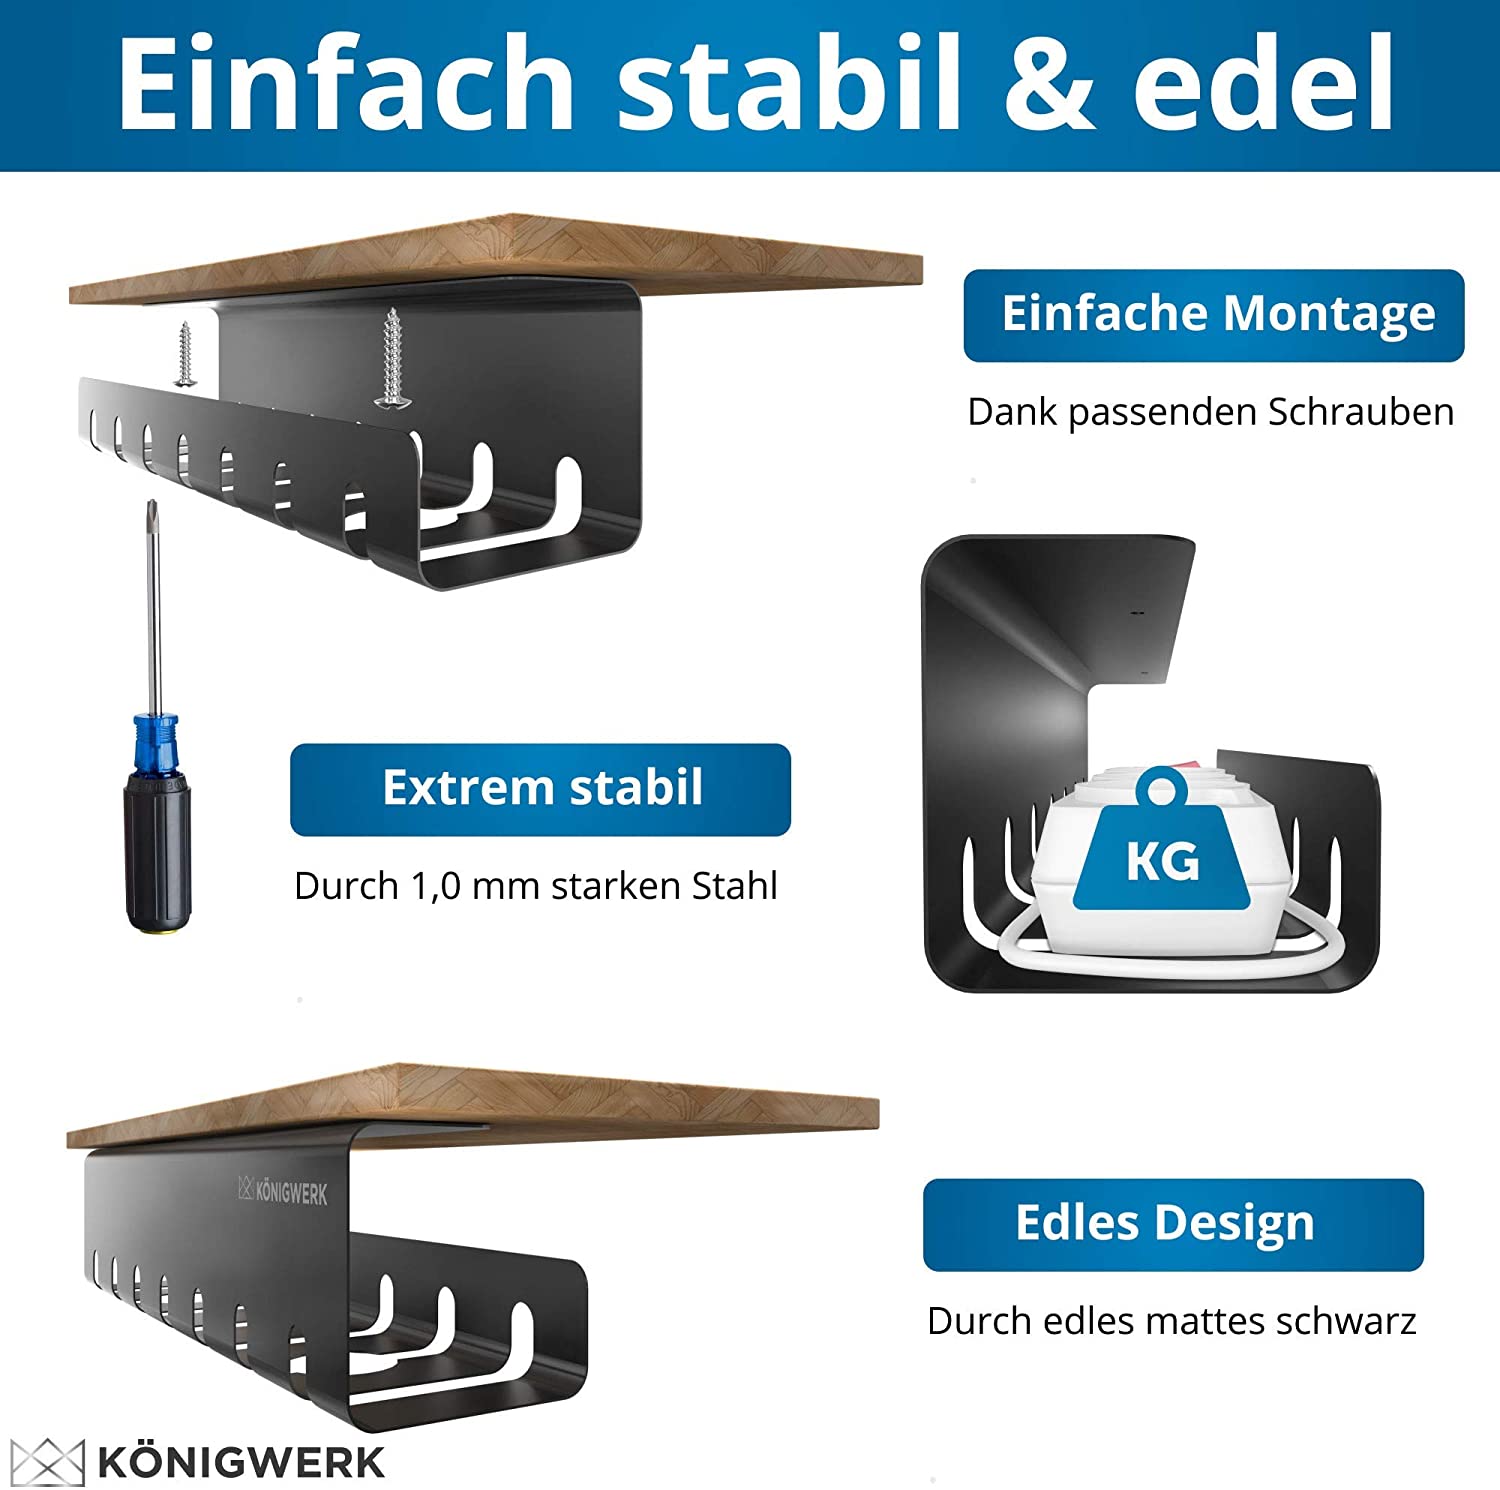  Under Desk Cable Management Tray Factory OEM ODM Desk Cable Tray Cord Organize Wire Racks